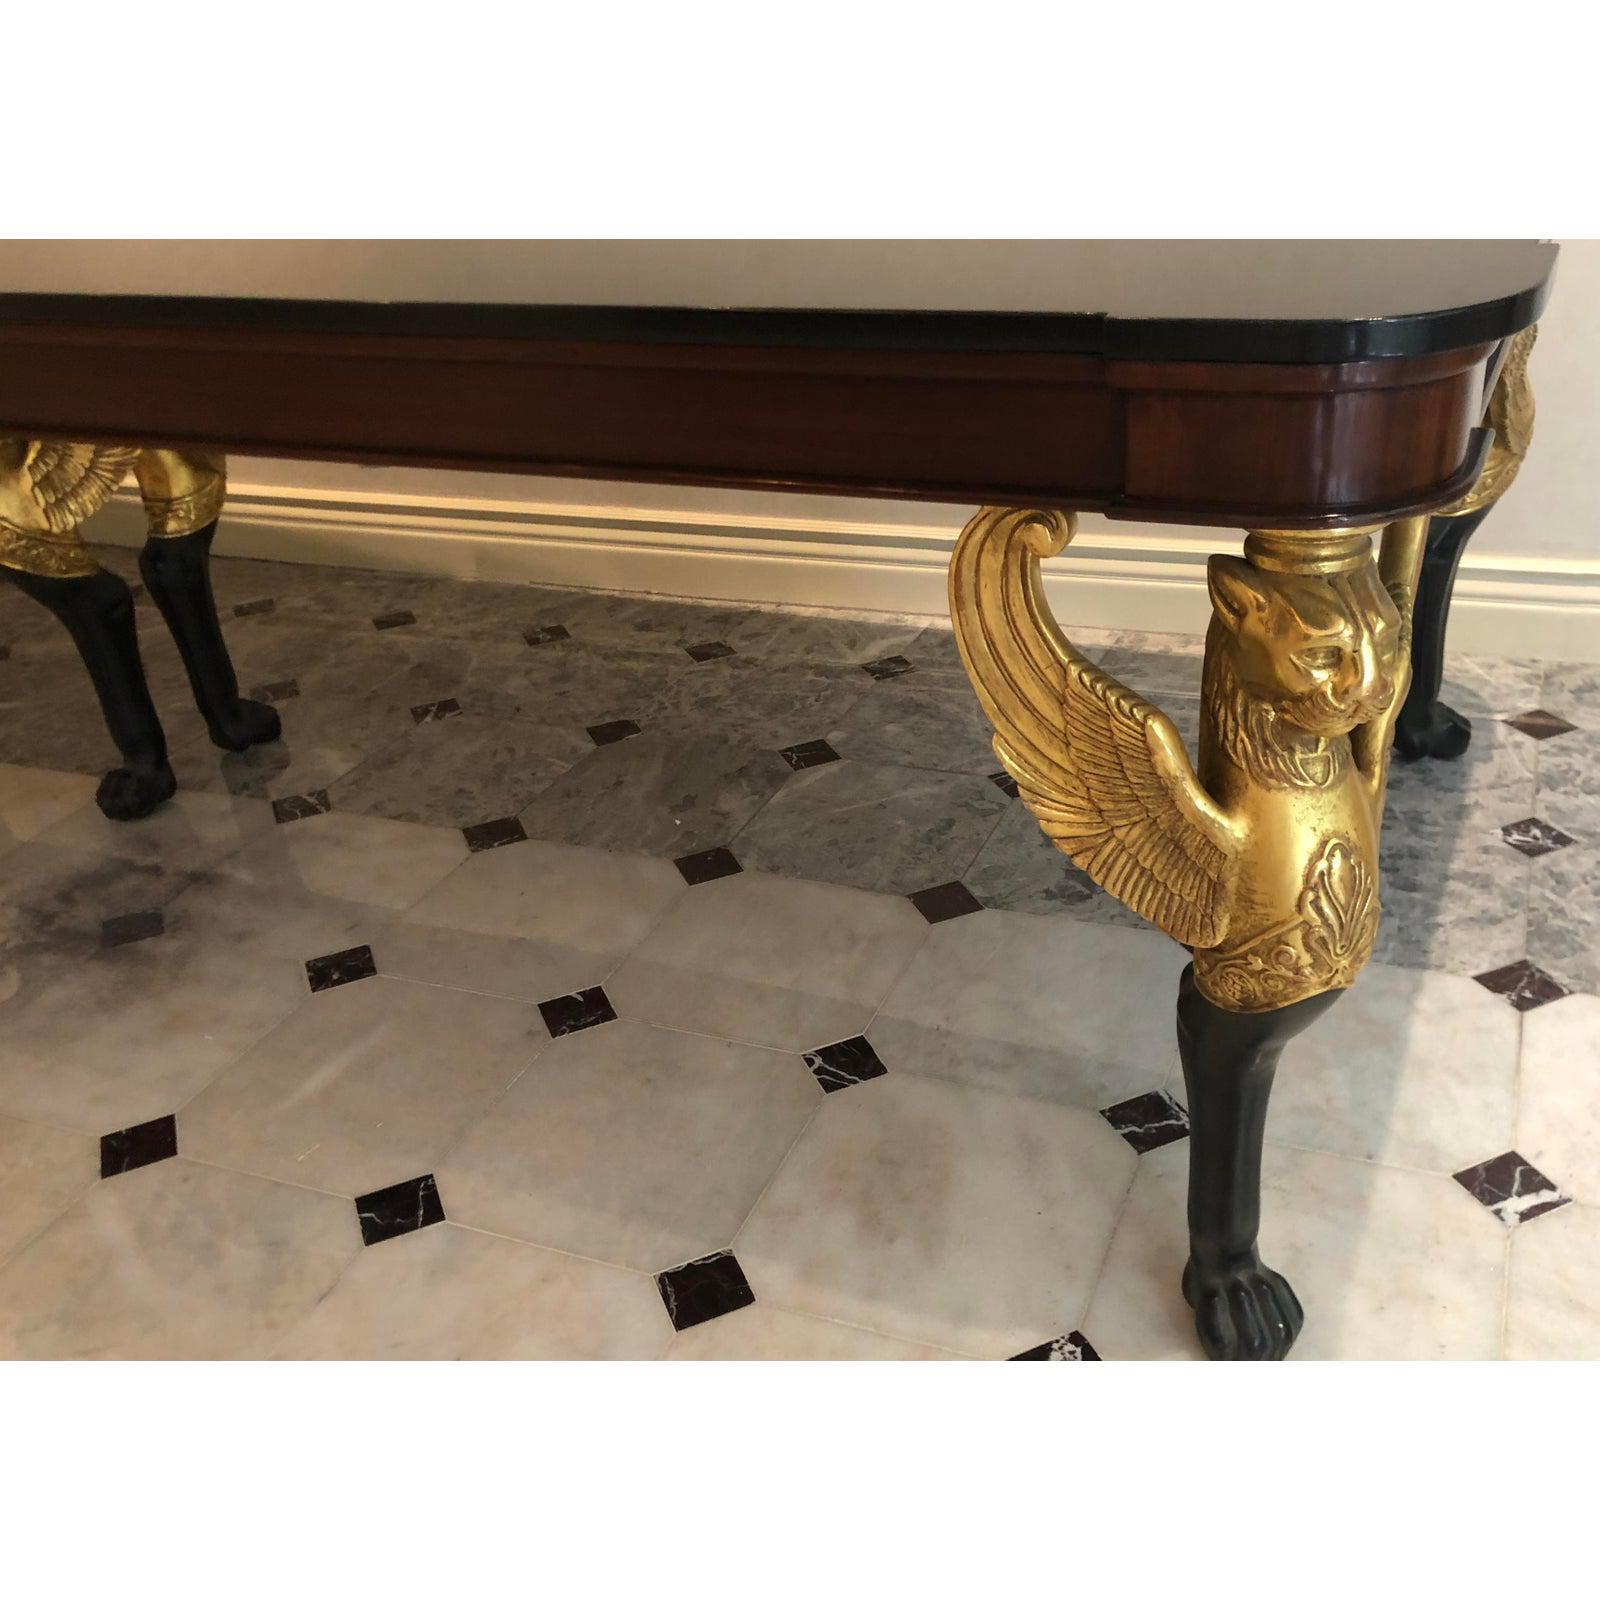 Signed Thomas Morgan 11’ Empire dining or conference table W Winged Griffins. Features hand carved and gilded details including winged griffin legs and three-piece granite top.